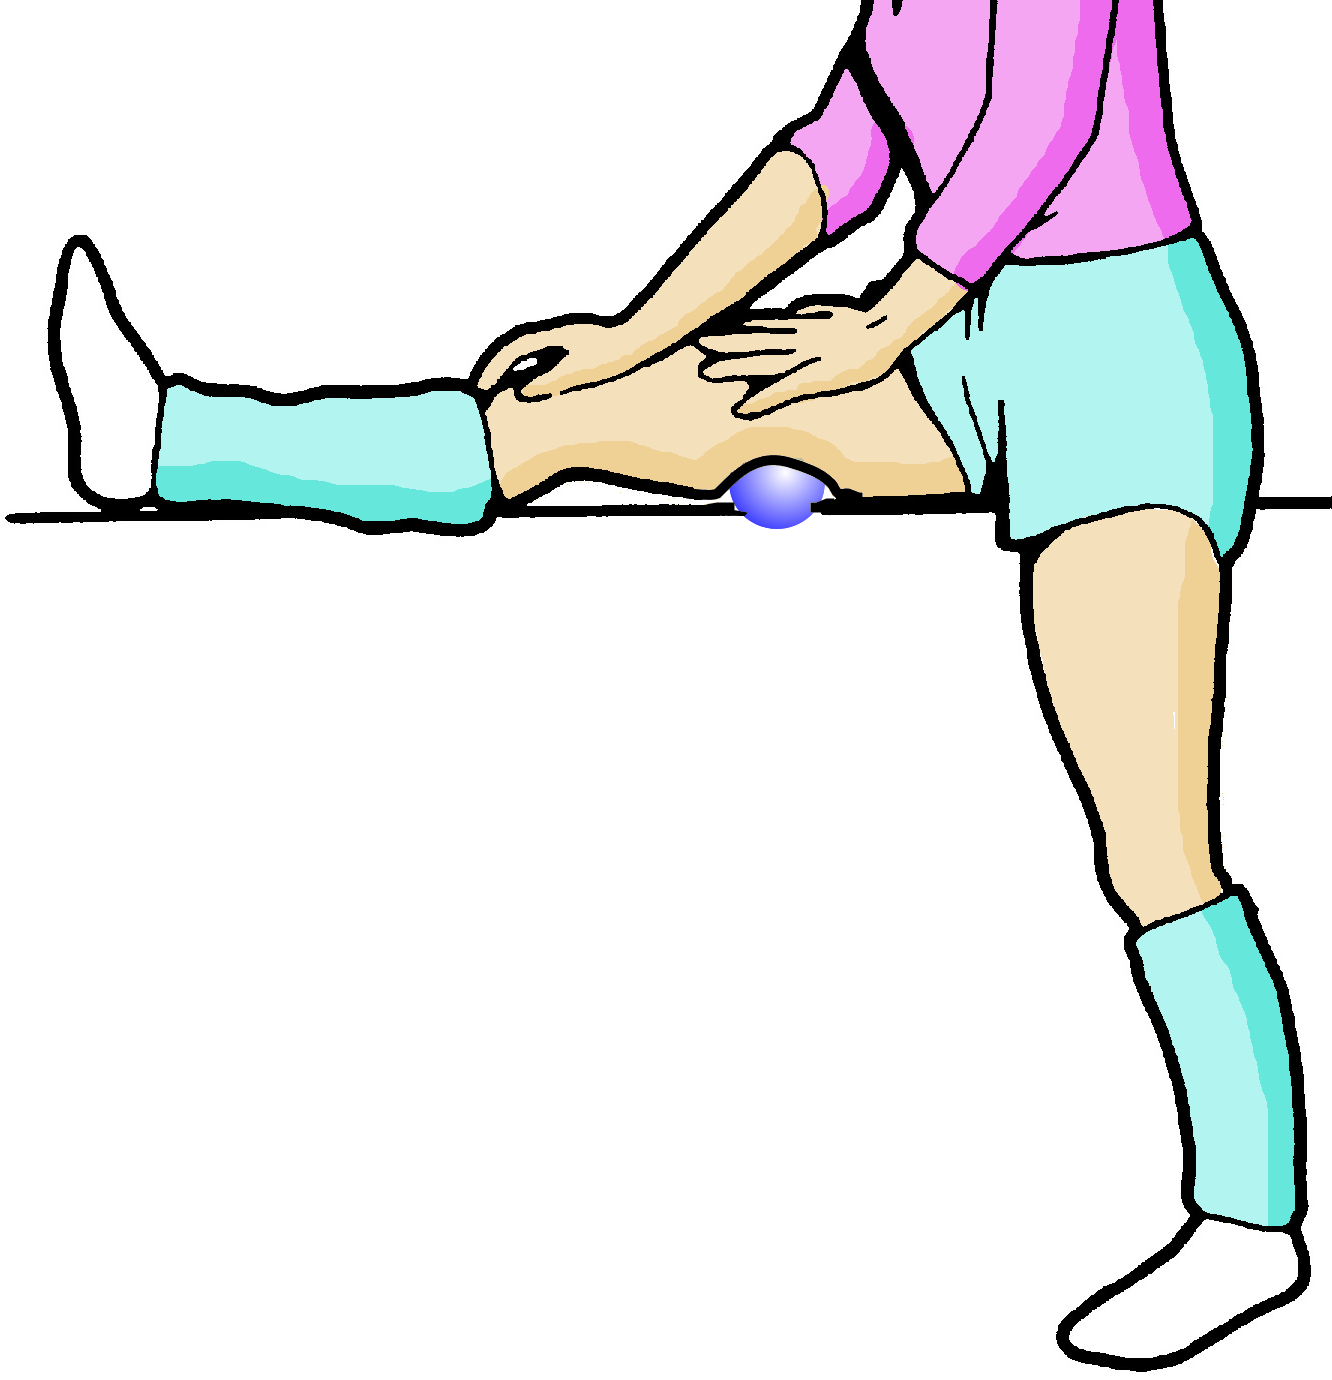 back of a knee clipart - Clip Art Library.